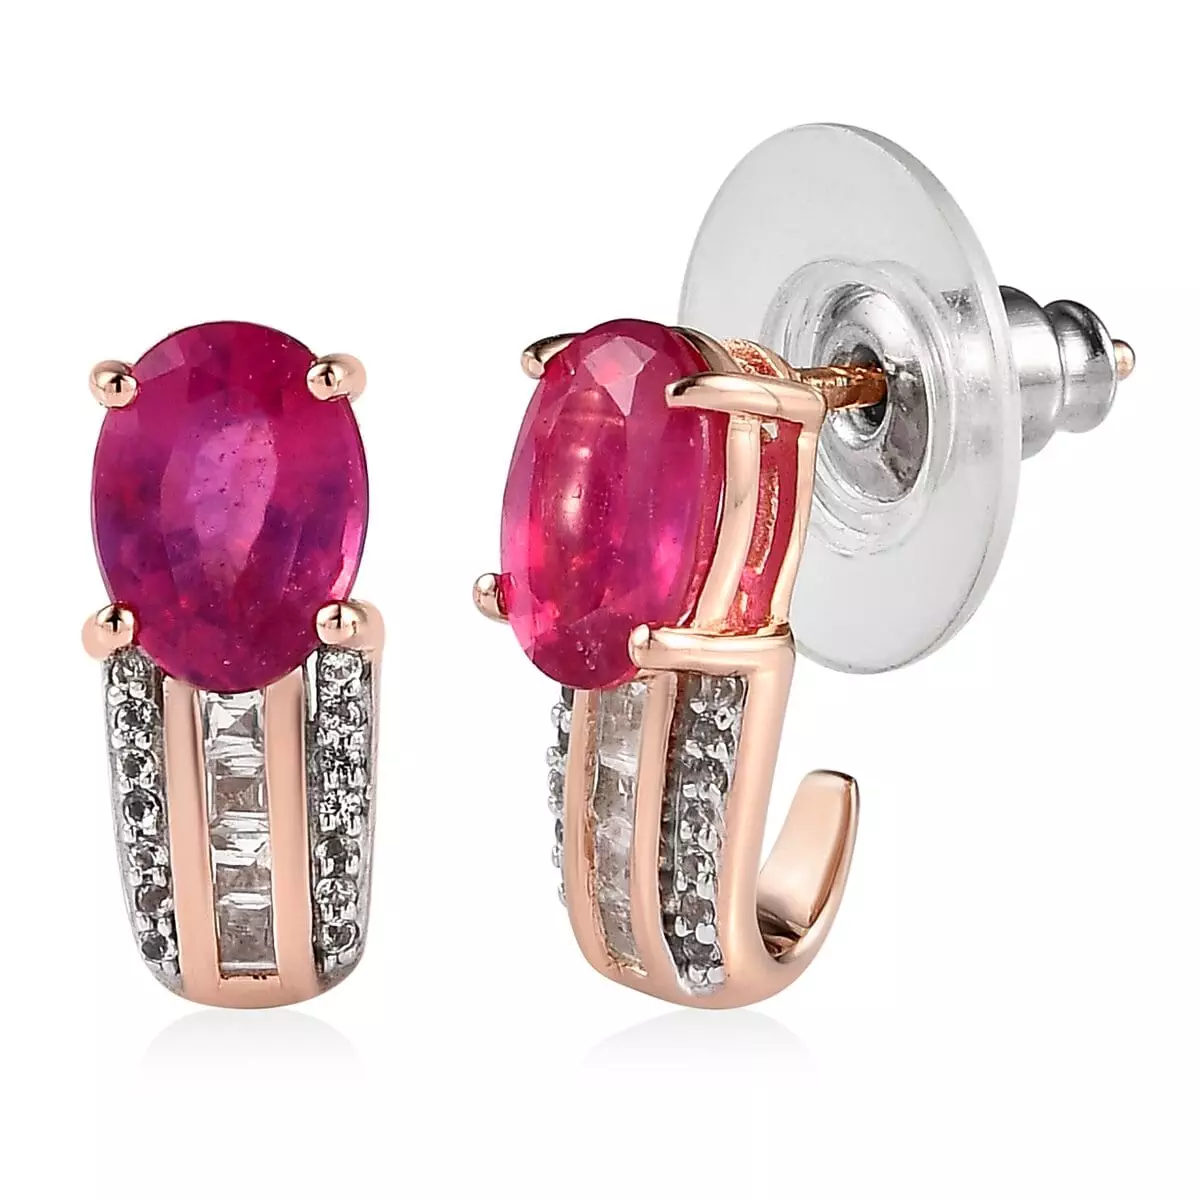 Ilakaka Hot Pink Sapphire (FF) and White Topaz J-Hoop Earrings in Vermeil Rose Gold Over Sterling Silver 4.00 ctw